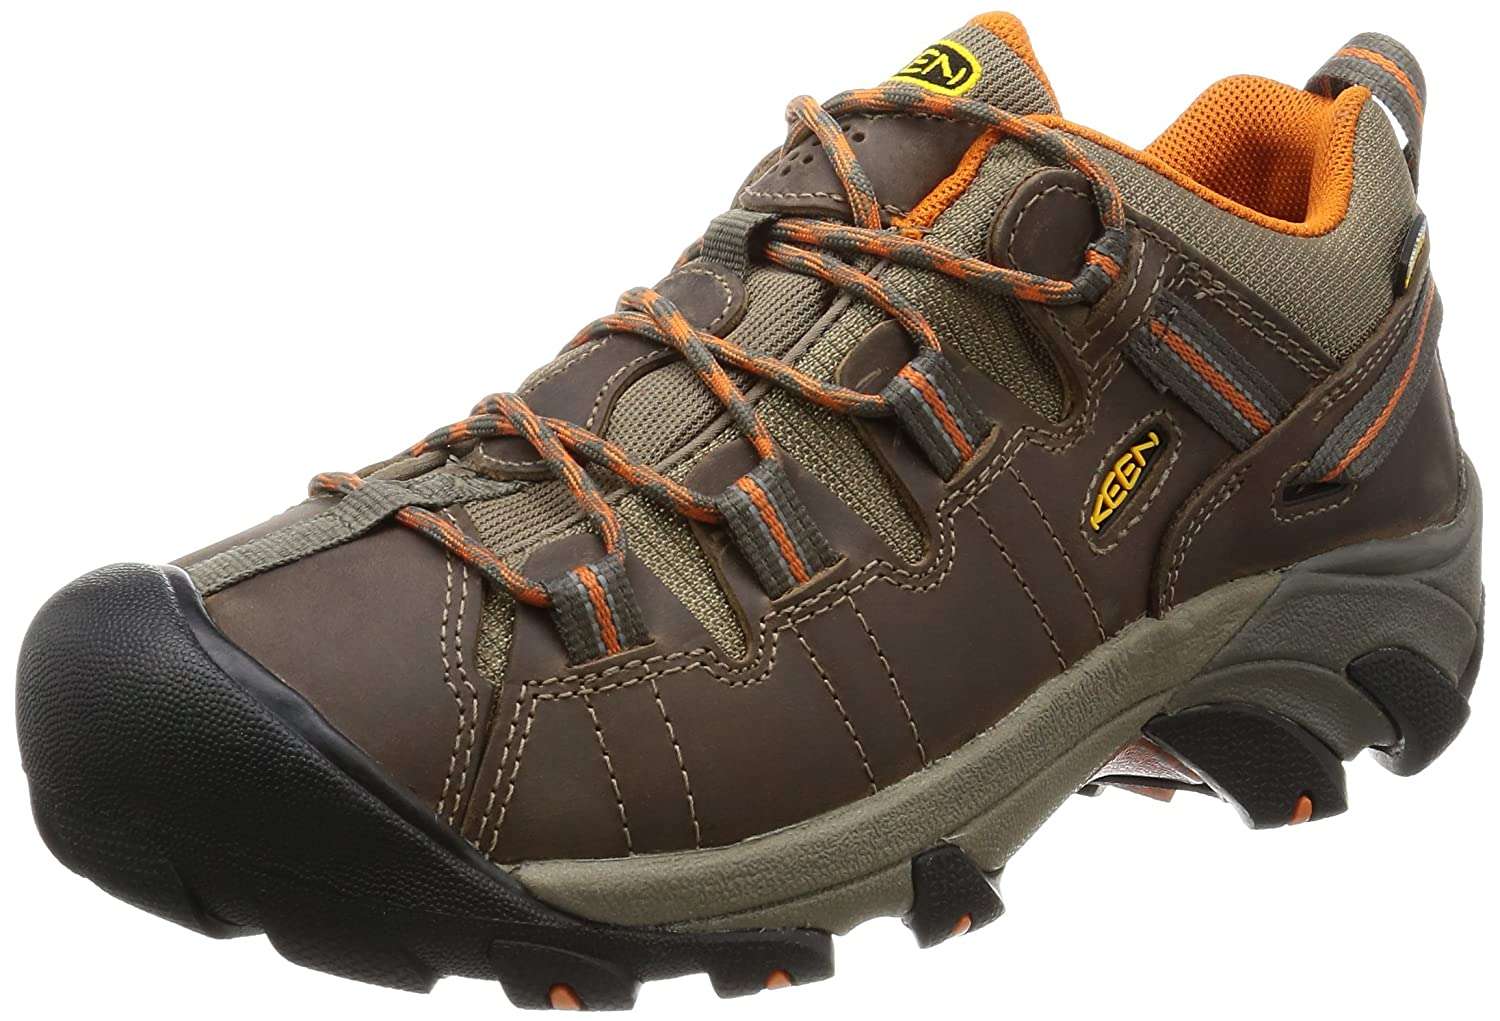 Best Hiking Shoes (Review & Buying Guide) in 2020